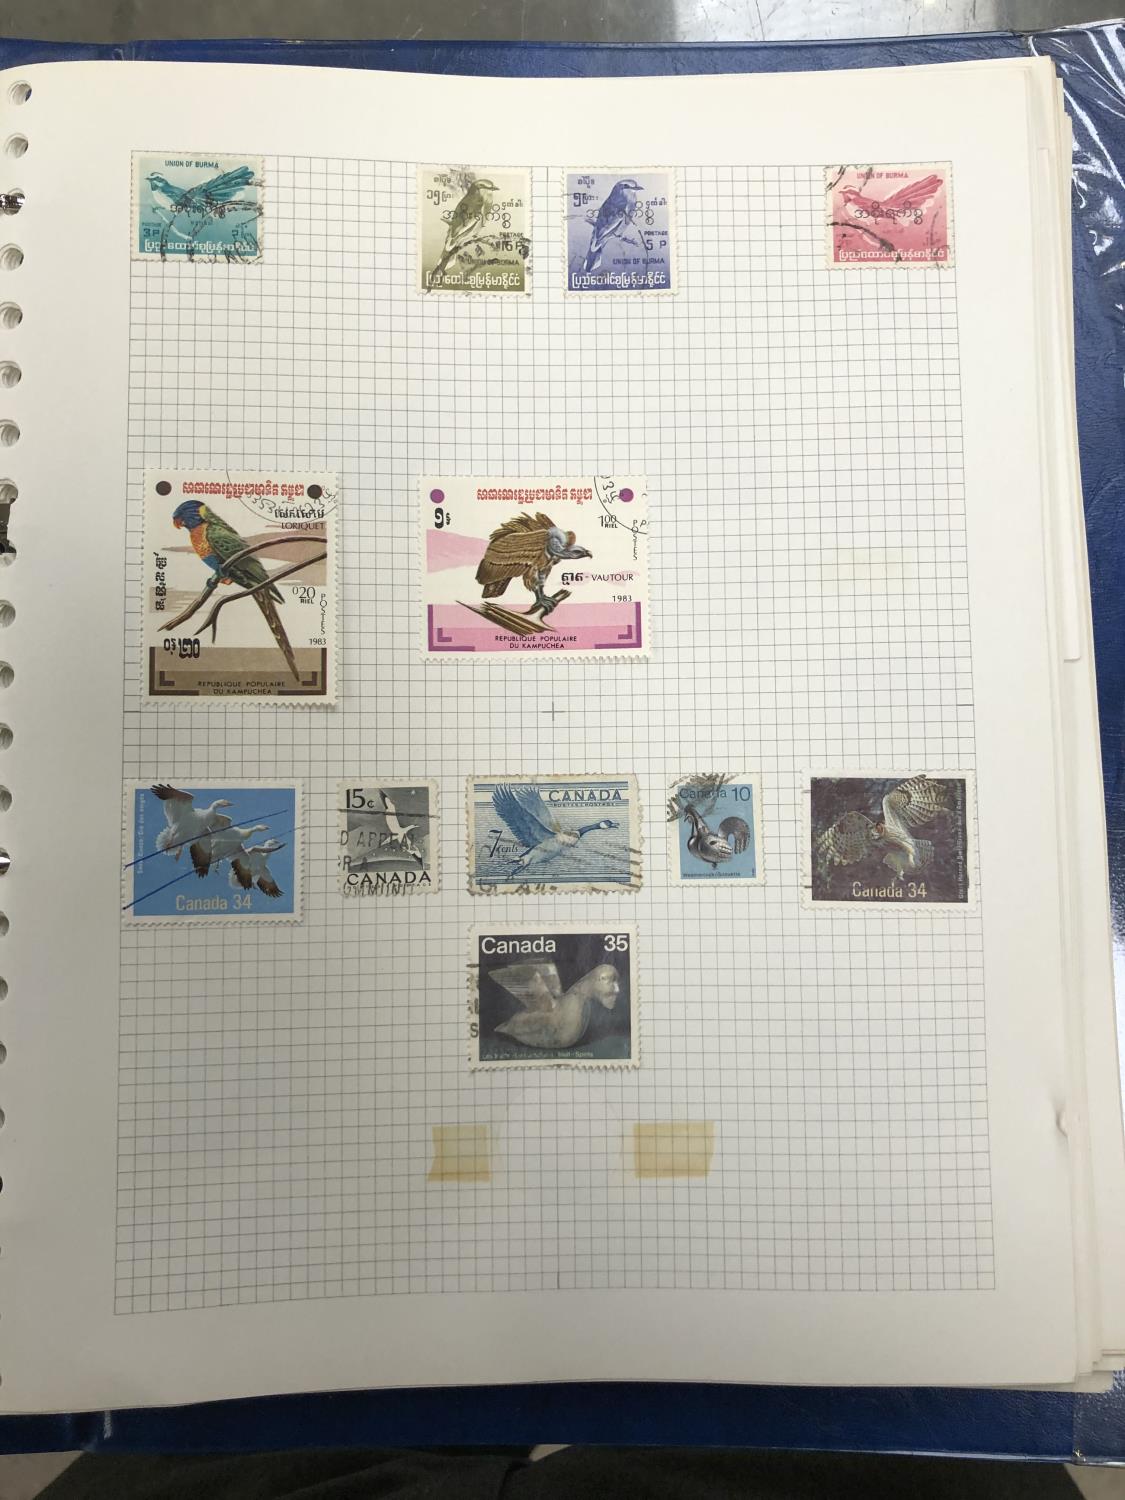 BIRDS . AN ALL WORLD THEMATIC COLLECTION OF BIRDS ON STAMPS . INCLUDED USA 2 X 25 SHEETS , PLUS - Image 2 of 9